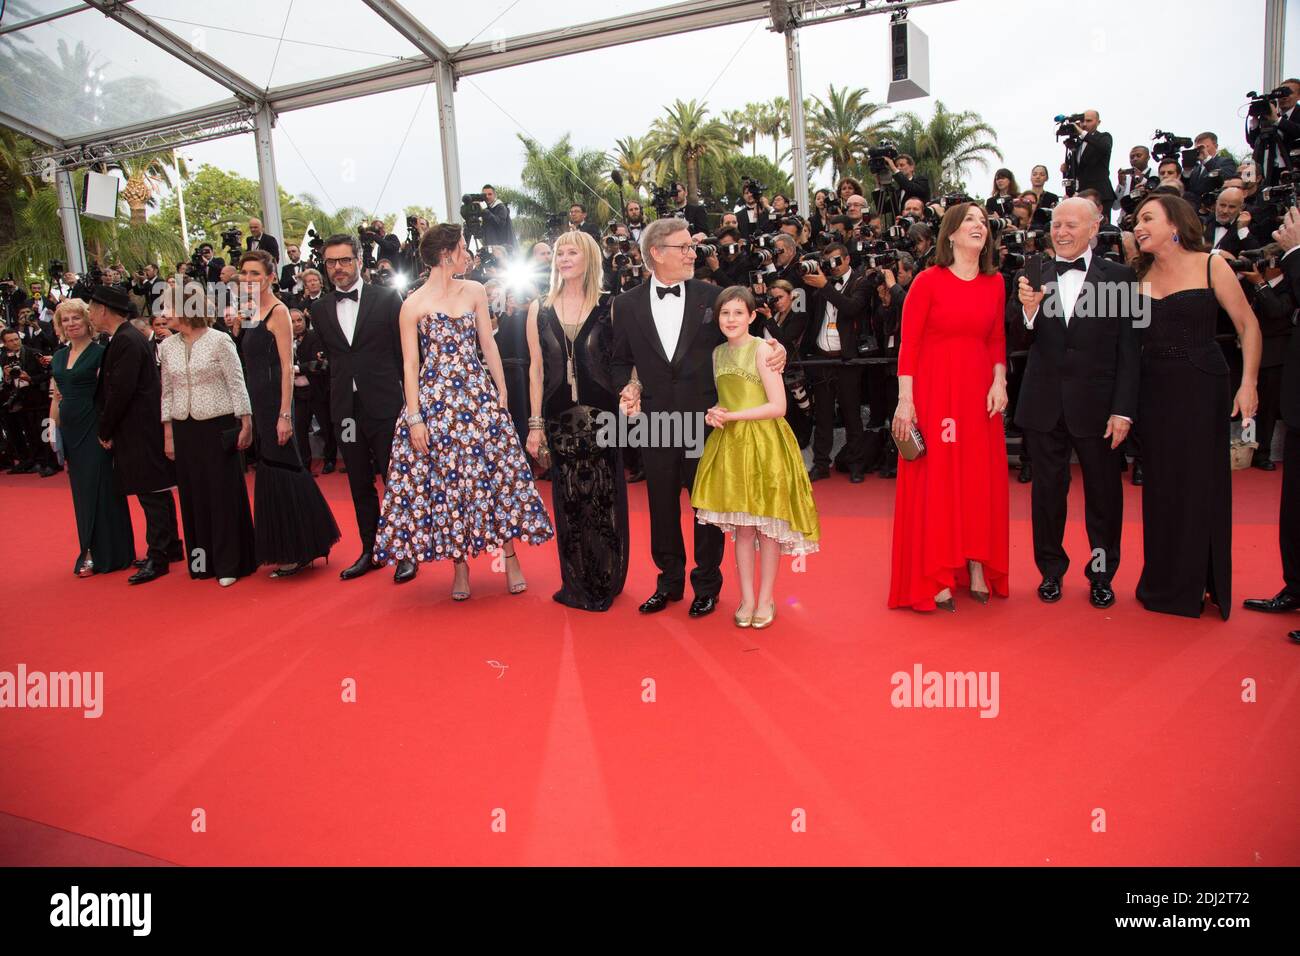 Frank Marshall, Kathleen Kennedy, Kate Capshaw, Steven Spielberg, Ruby Barnhill, Mark Rylance, Claire van Kampen, Lucy Dahl, Penelope Wilton and Jemaine Clement - CANNES 2016 - MONTEE DU FILM 'THE BFG (LE BON GROS GEANT) Photo by Nasser Berzane/ABACAPRESS.COM Stock Photo